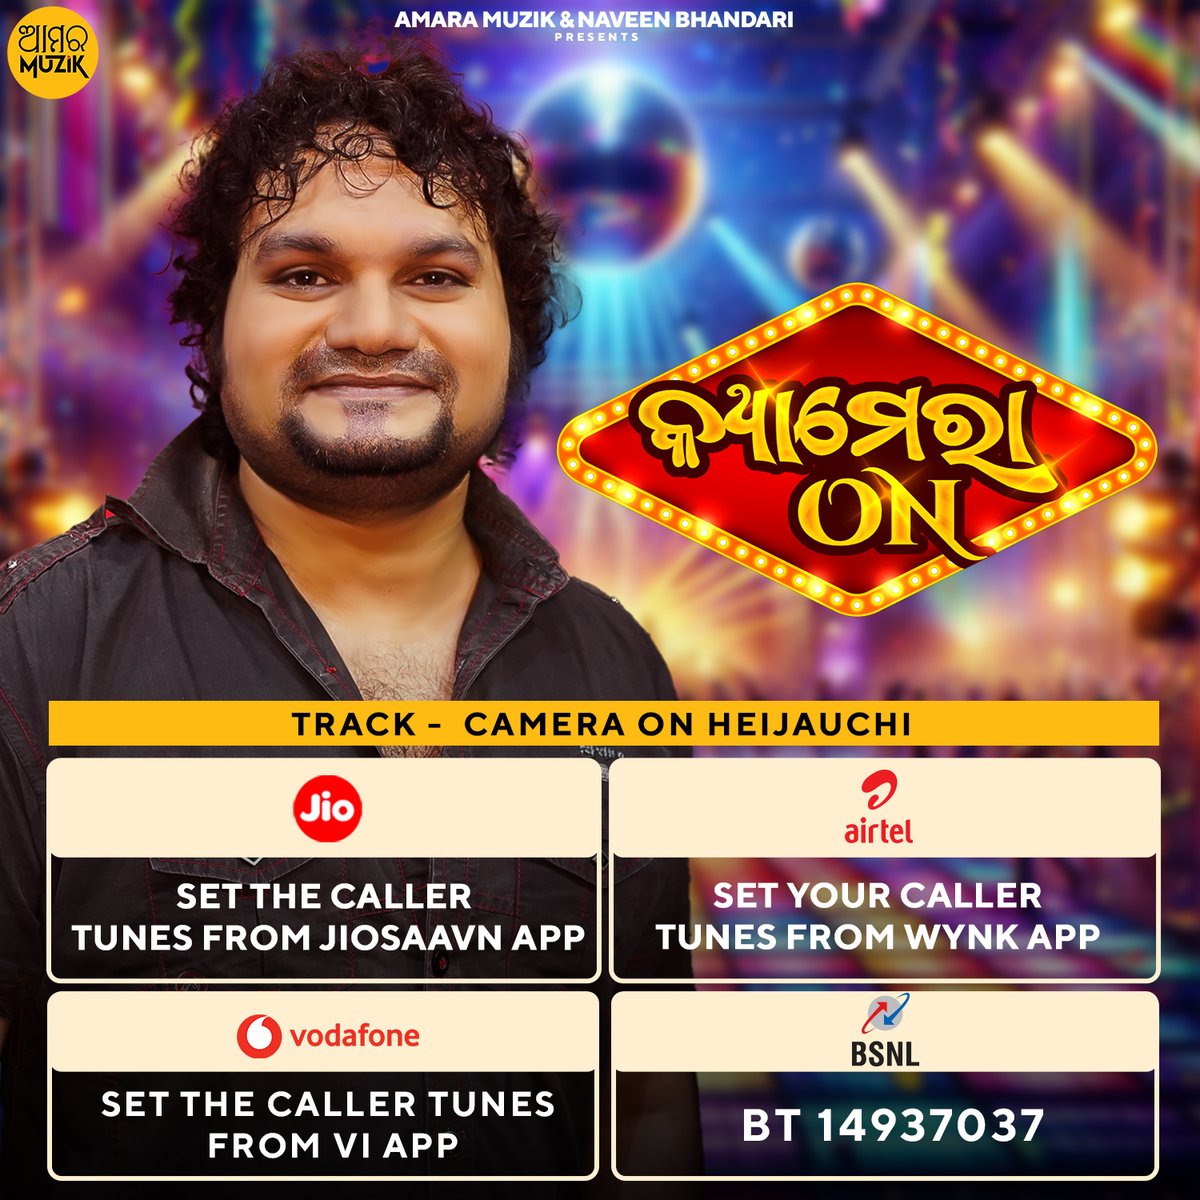 Set Camera On Heijauchi as your caller tune >
Airtel users can set your caller tunes from Wynk app Jio users can set the caller tunes from JioSaavn Vodafone users can set the callertune from Vi app Bsnl Users: SMS BT 14937037 to 56700

#CameraOn #OdiaAlbum #AmaraMuzikOdia